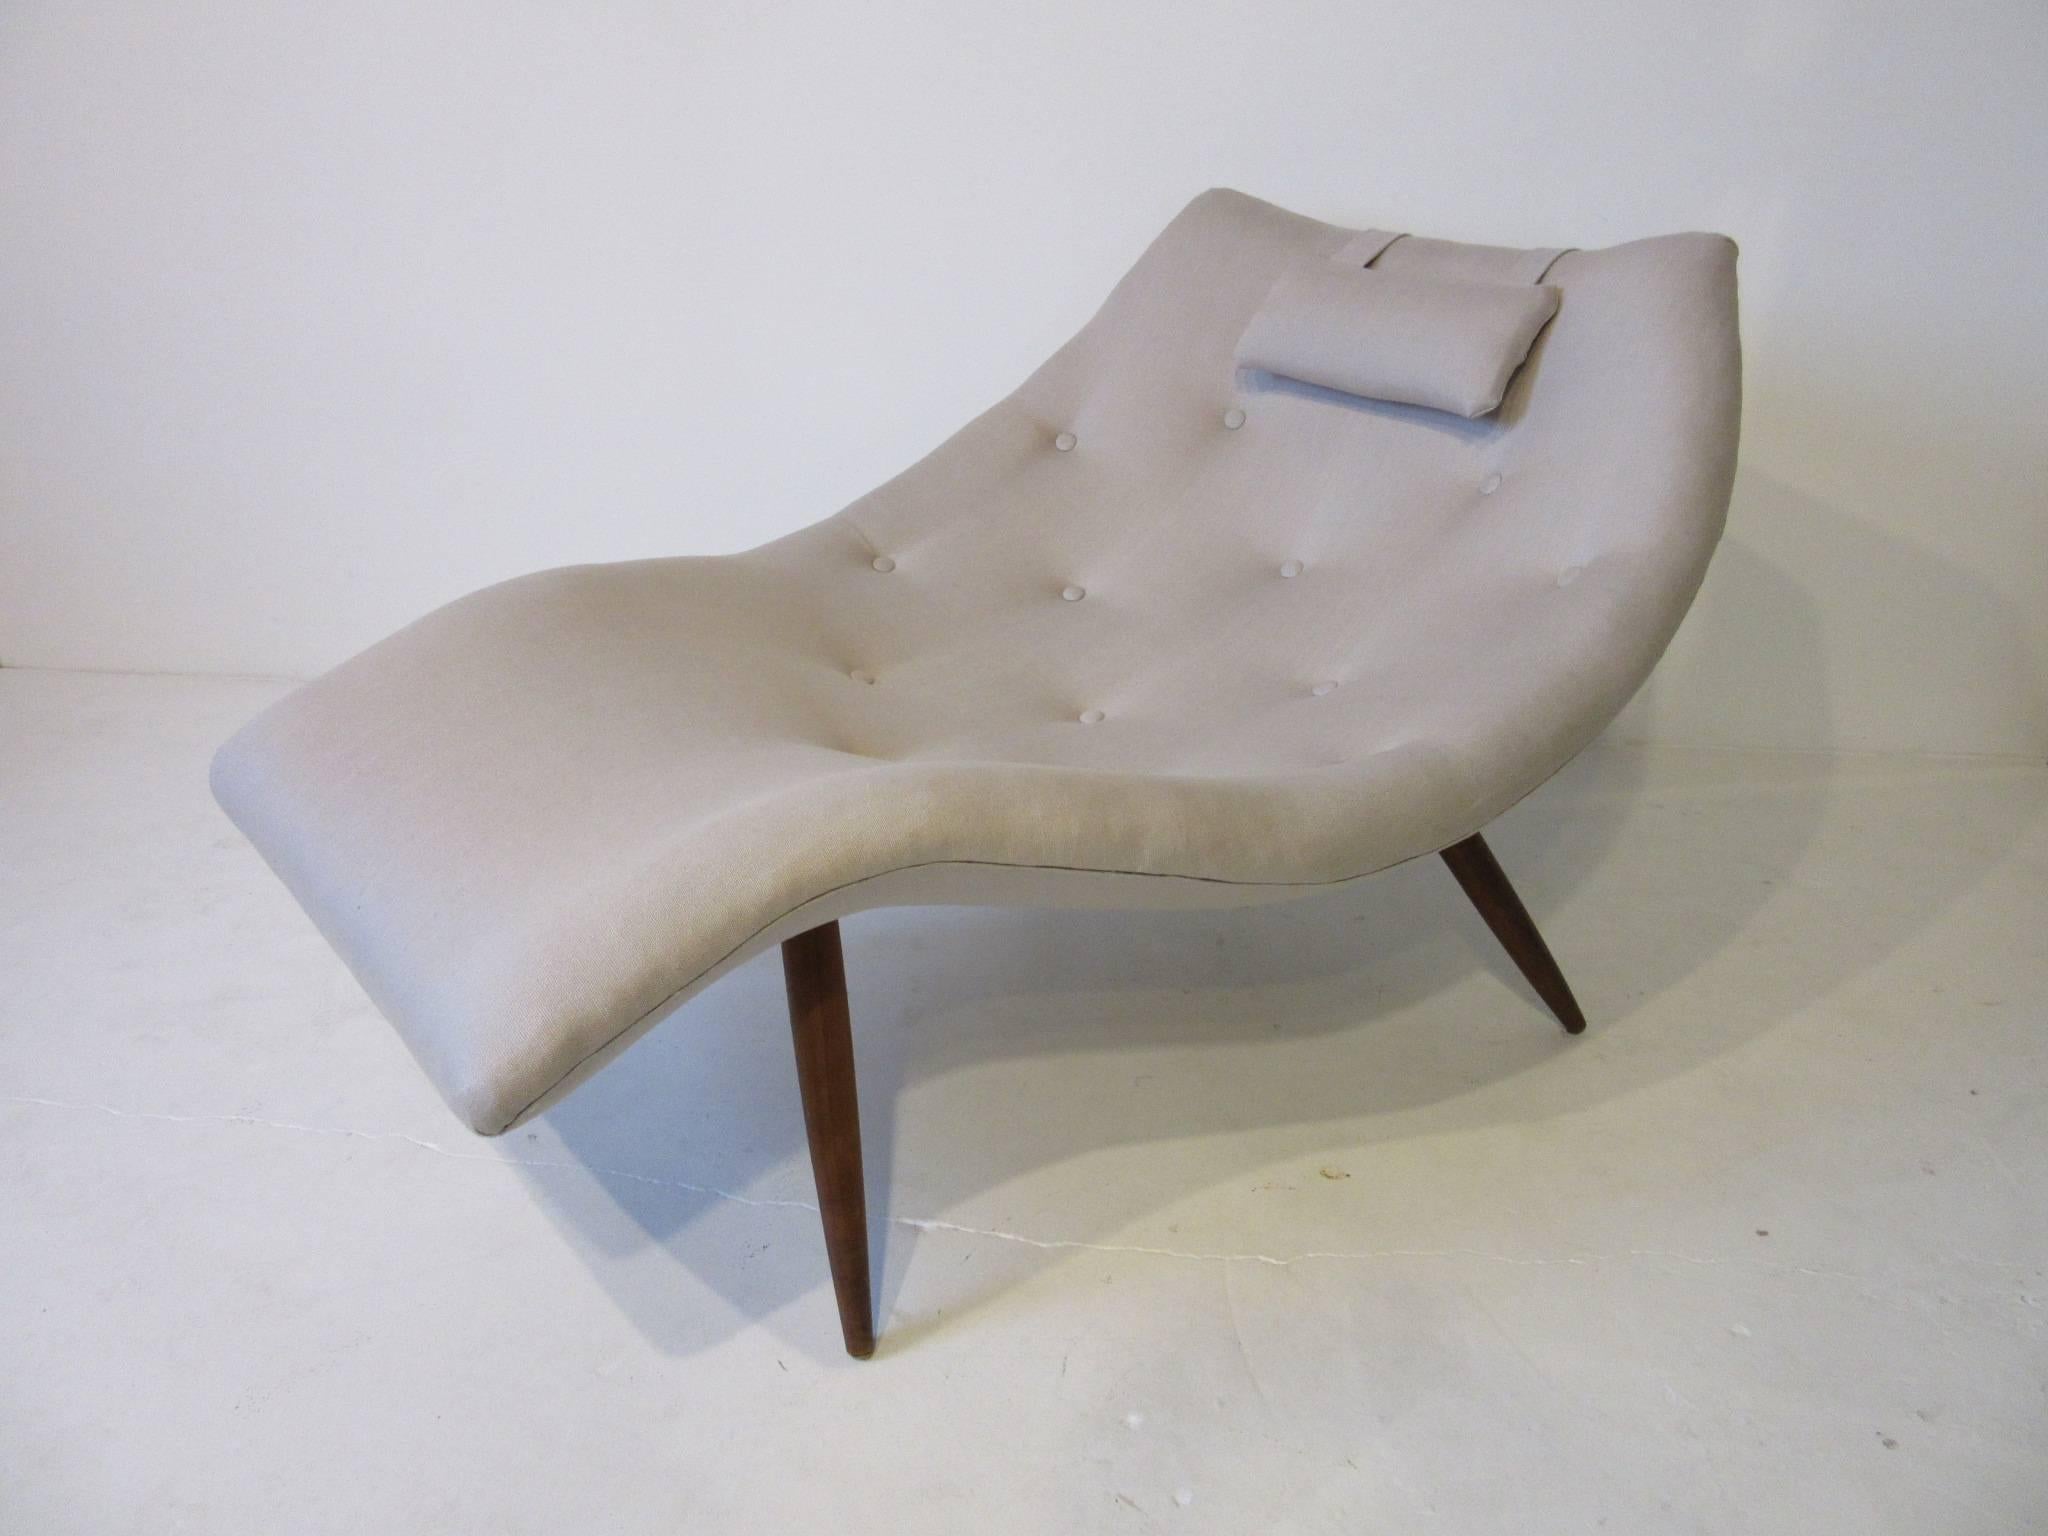 A sculptural Adrian Pearsall chaise longue chair designed at the top of his game with sensual curves forming a womb like space for relaxing. With adjustable head cushion, button top cushion upholstered in Fine Italian linen all sitting on solid